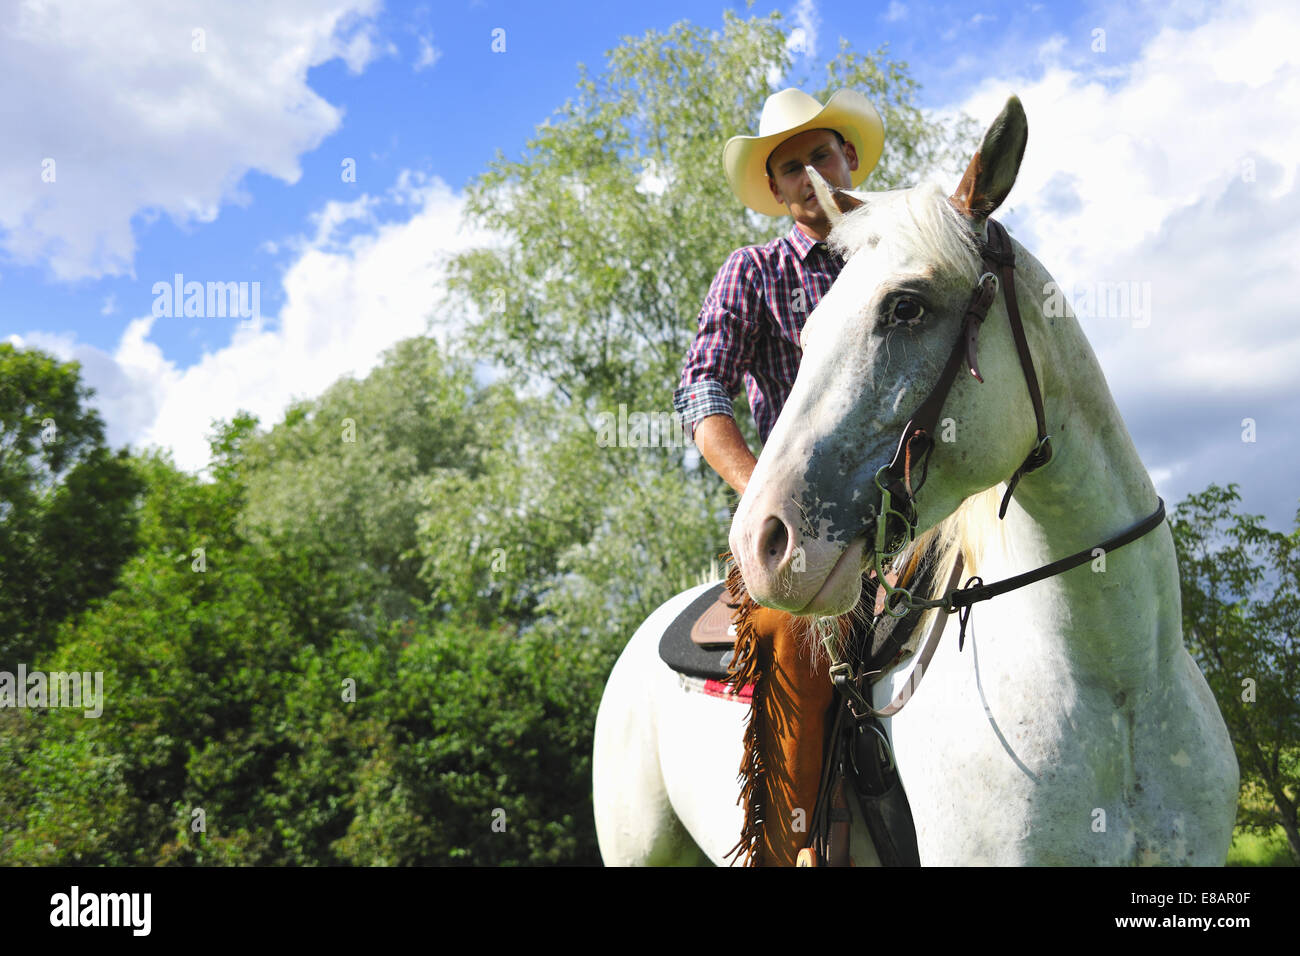 Low angle portrait of young man in cowboy gear on horse Stock Photo